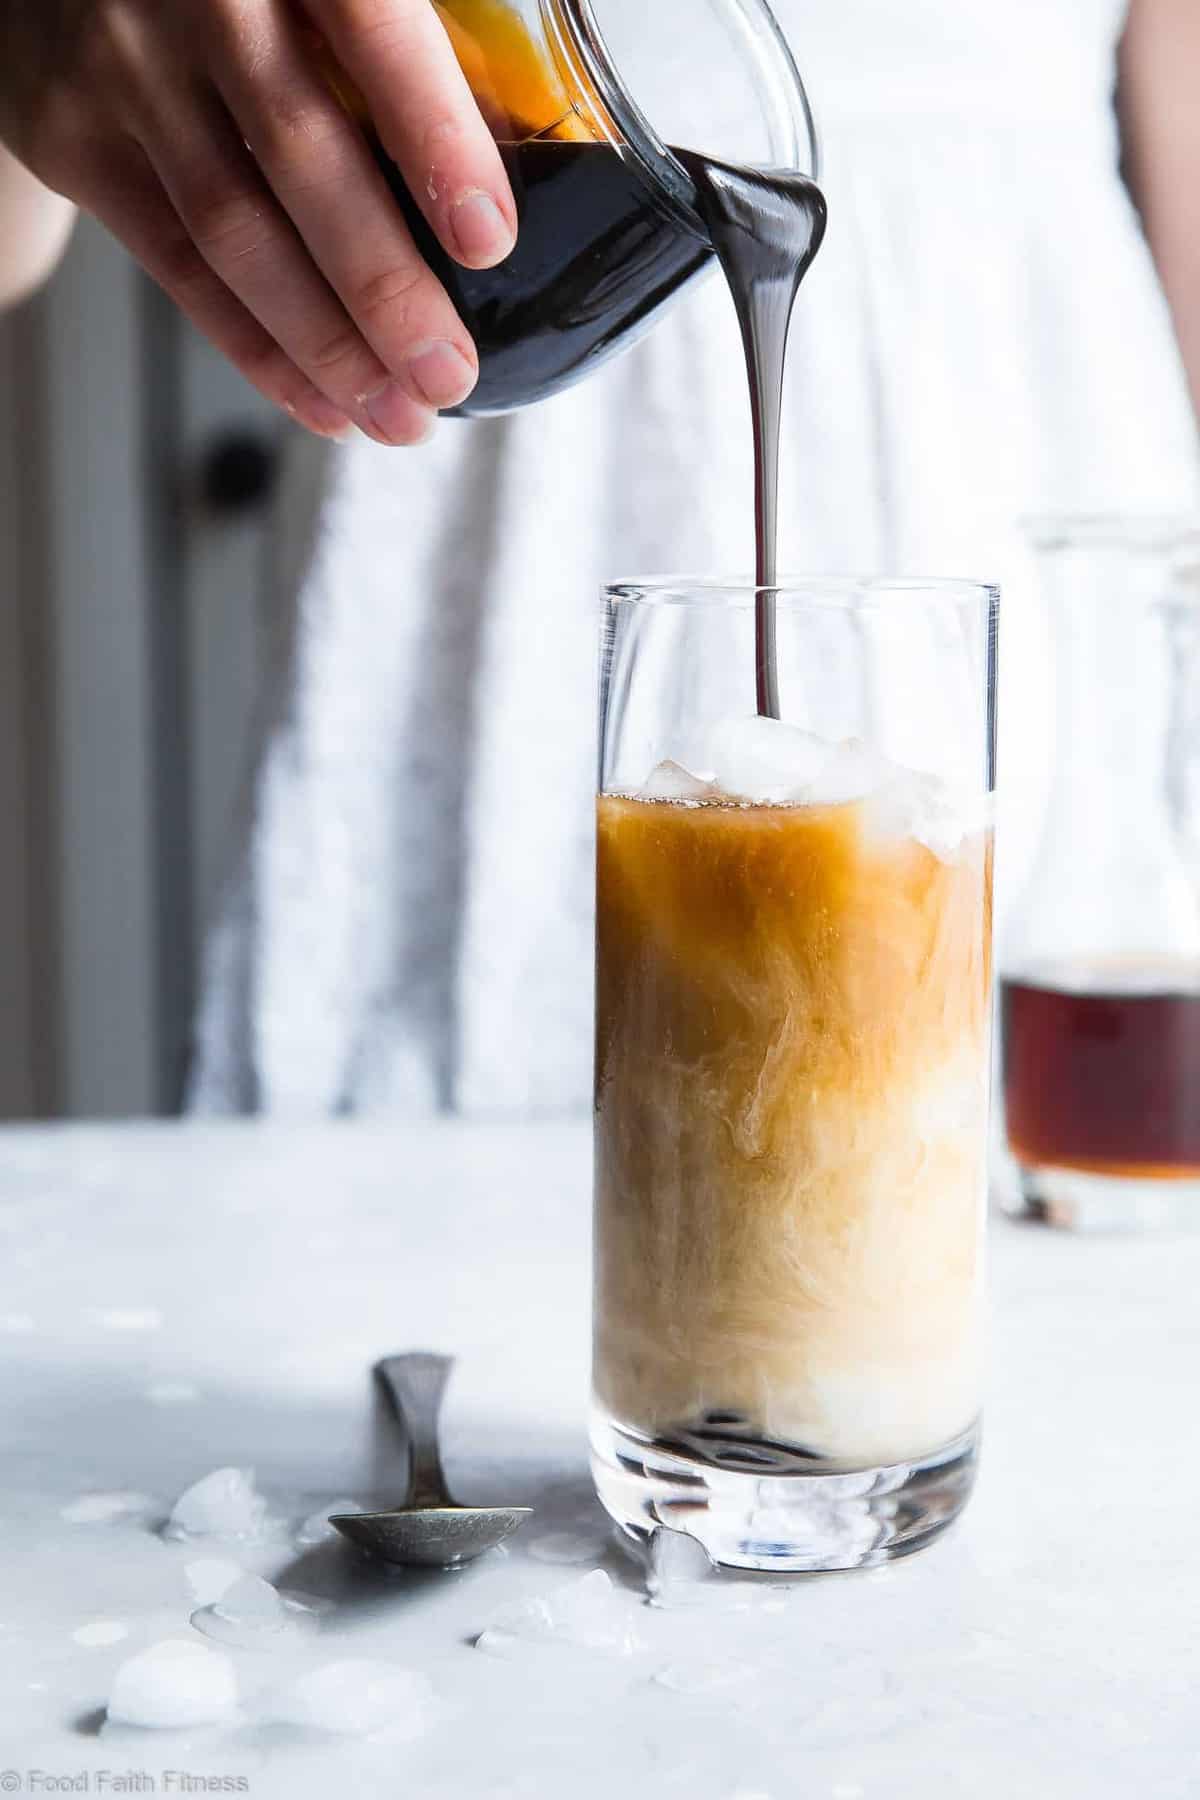 Paleo Homemade Caramel Vanilla Iced Coffee -Â Tastes WAY better than the coffee shop, is under 200 calories and is SO easy to make! Paleo and vegan friendly and gluten/grain/dairy/refined sugar free too! | #Foodfaithfitness | #Vegan #Paleo #Healthy #Glutenfree #Dairyfree